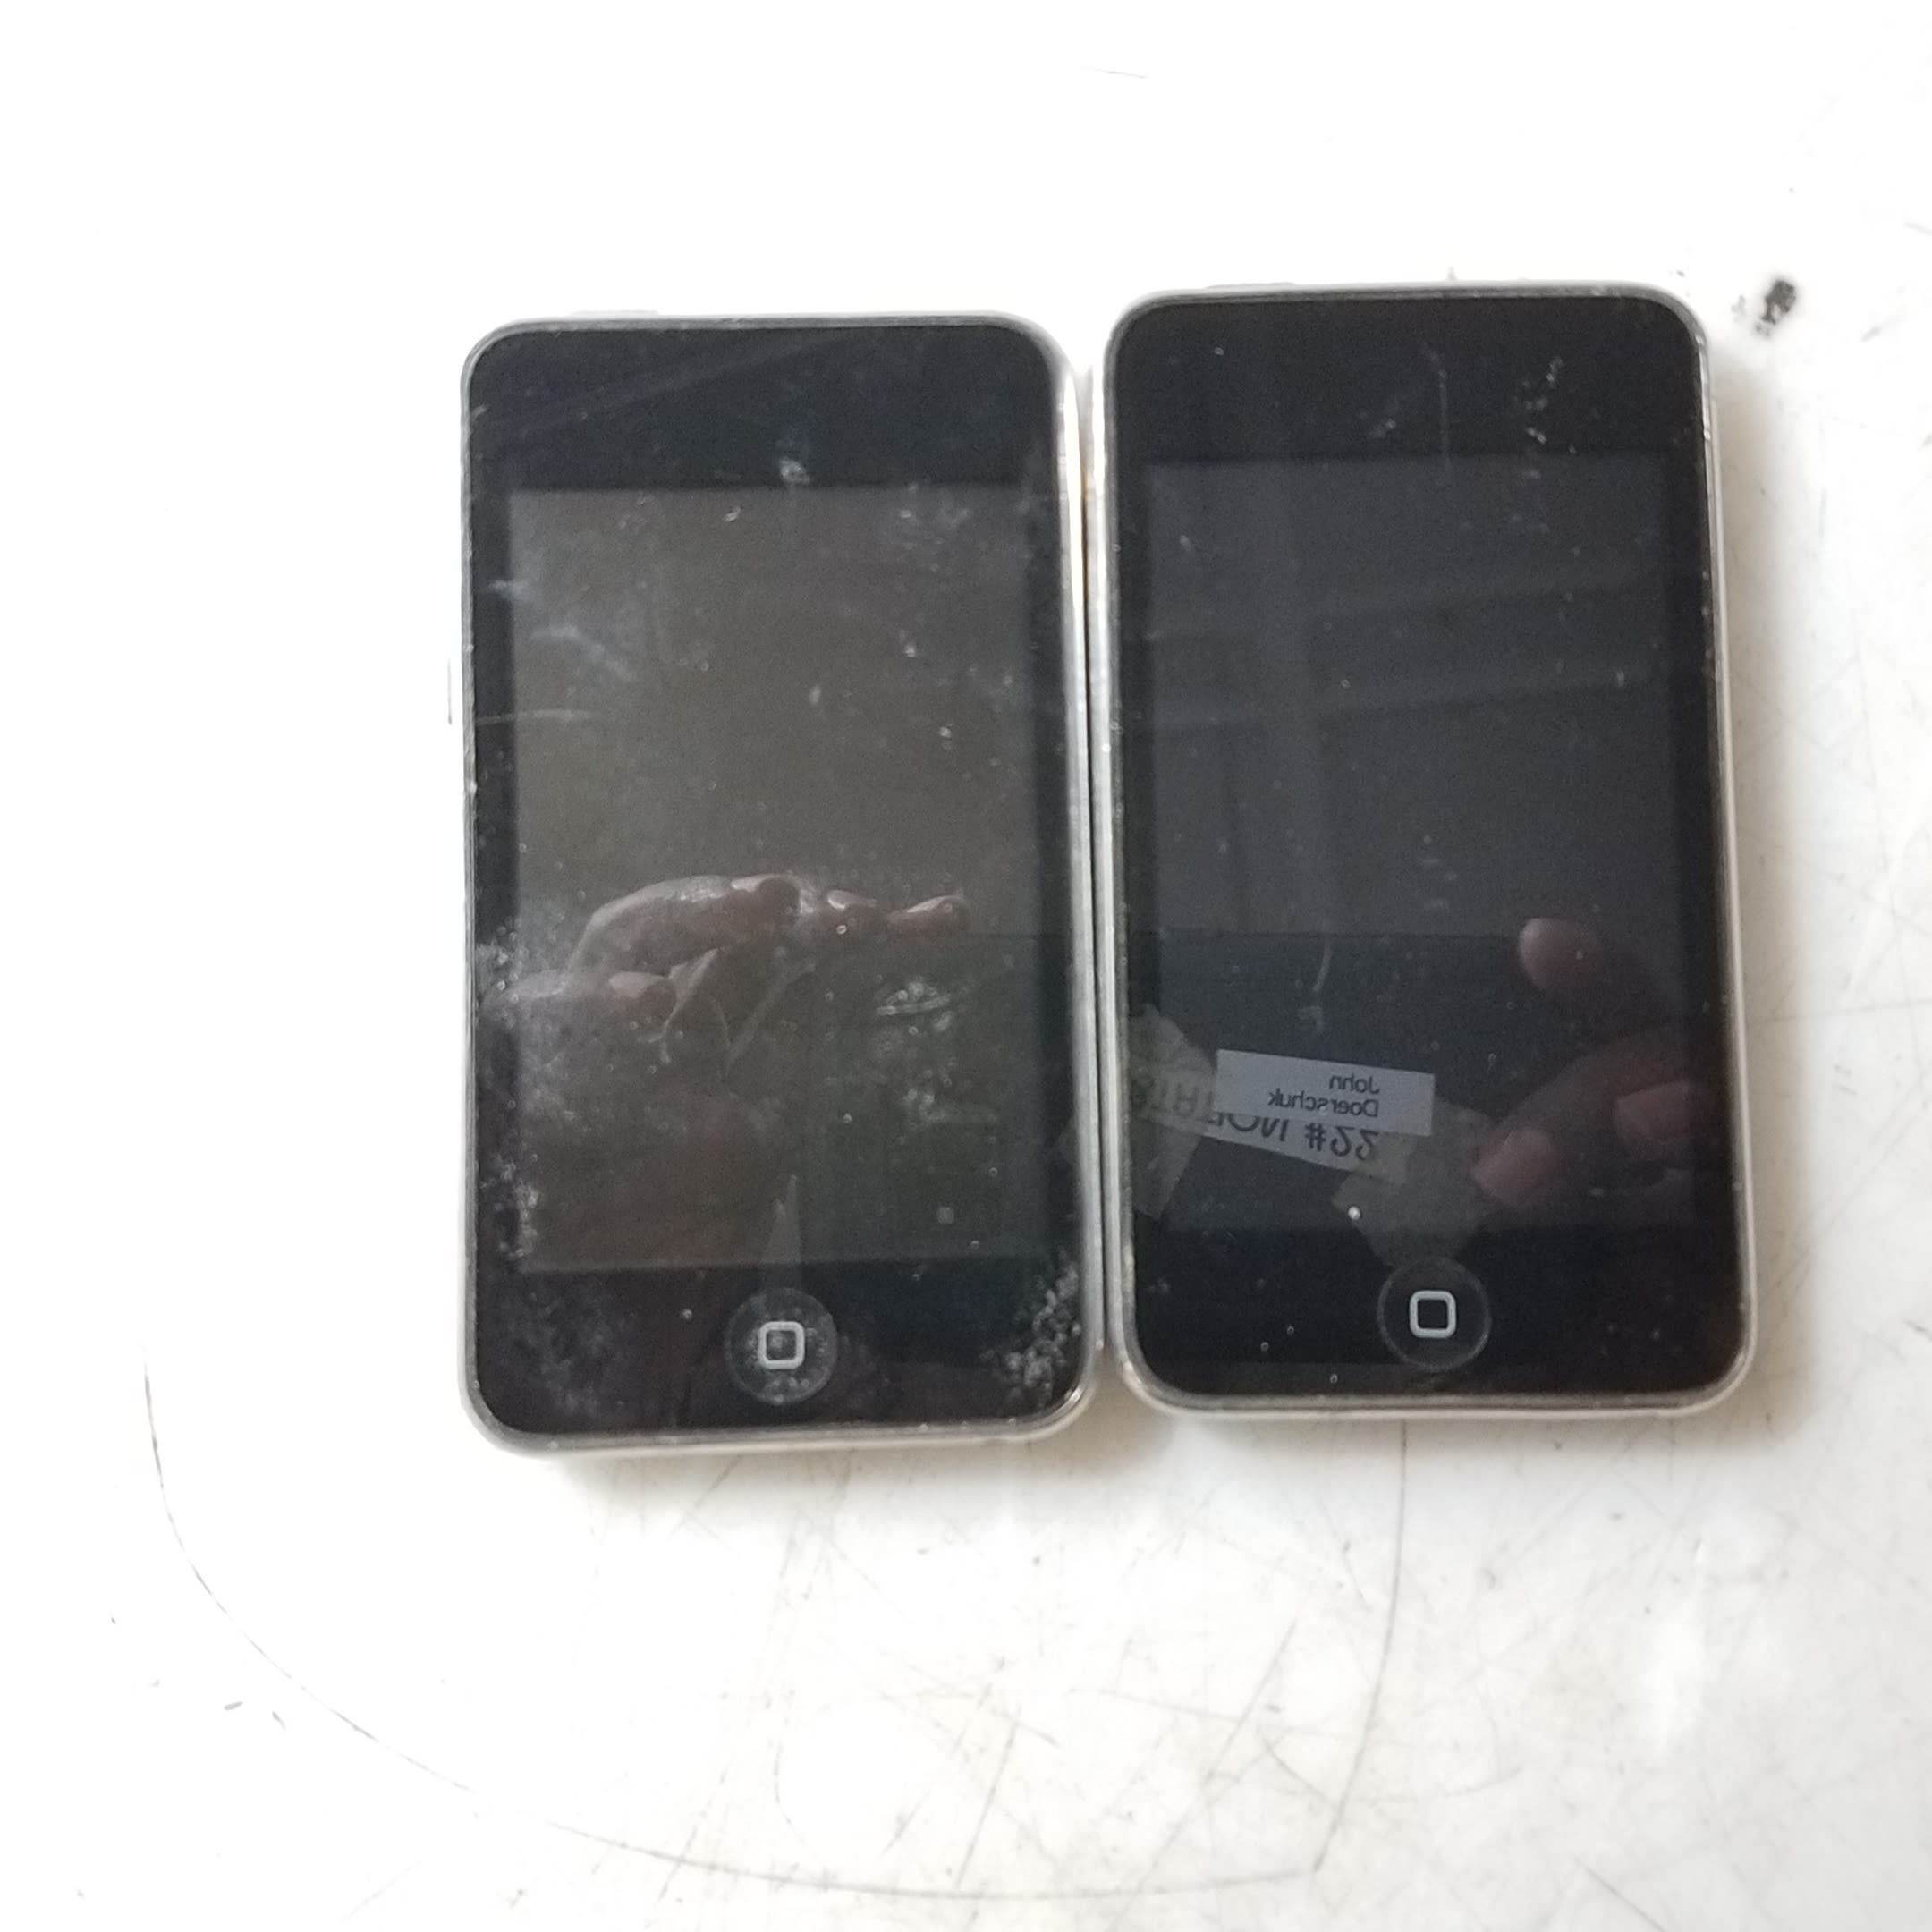 Buy the Lot of Two Apple iPod touch 2nd Gen Model A1288 storage 